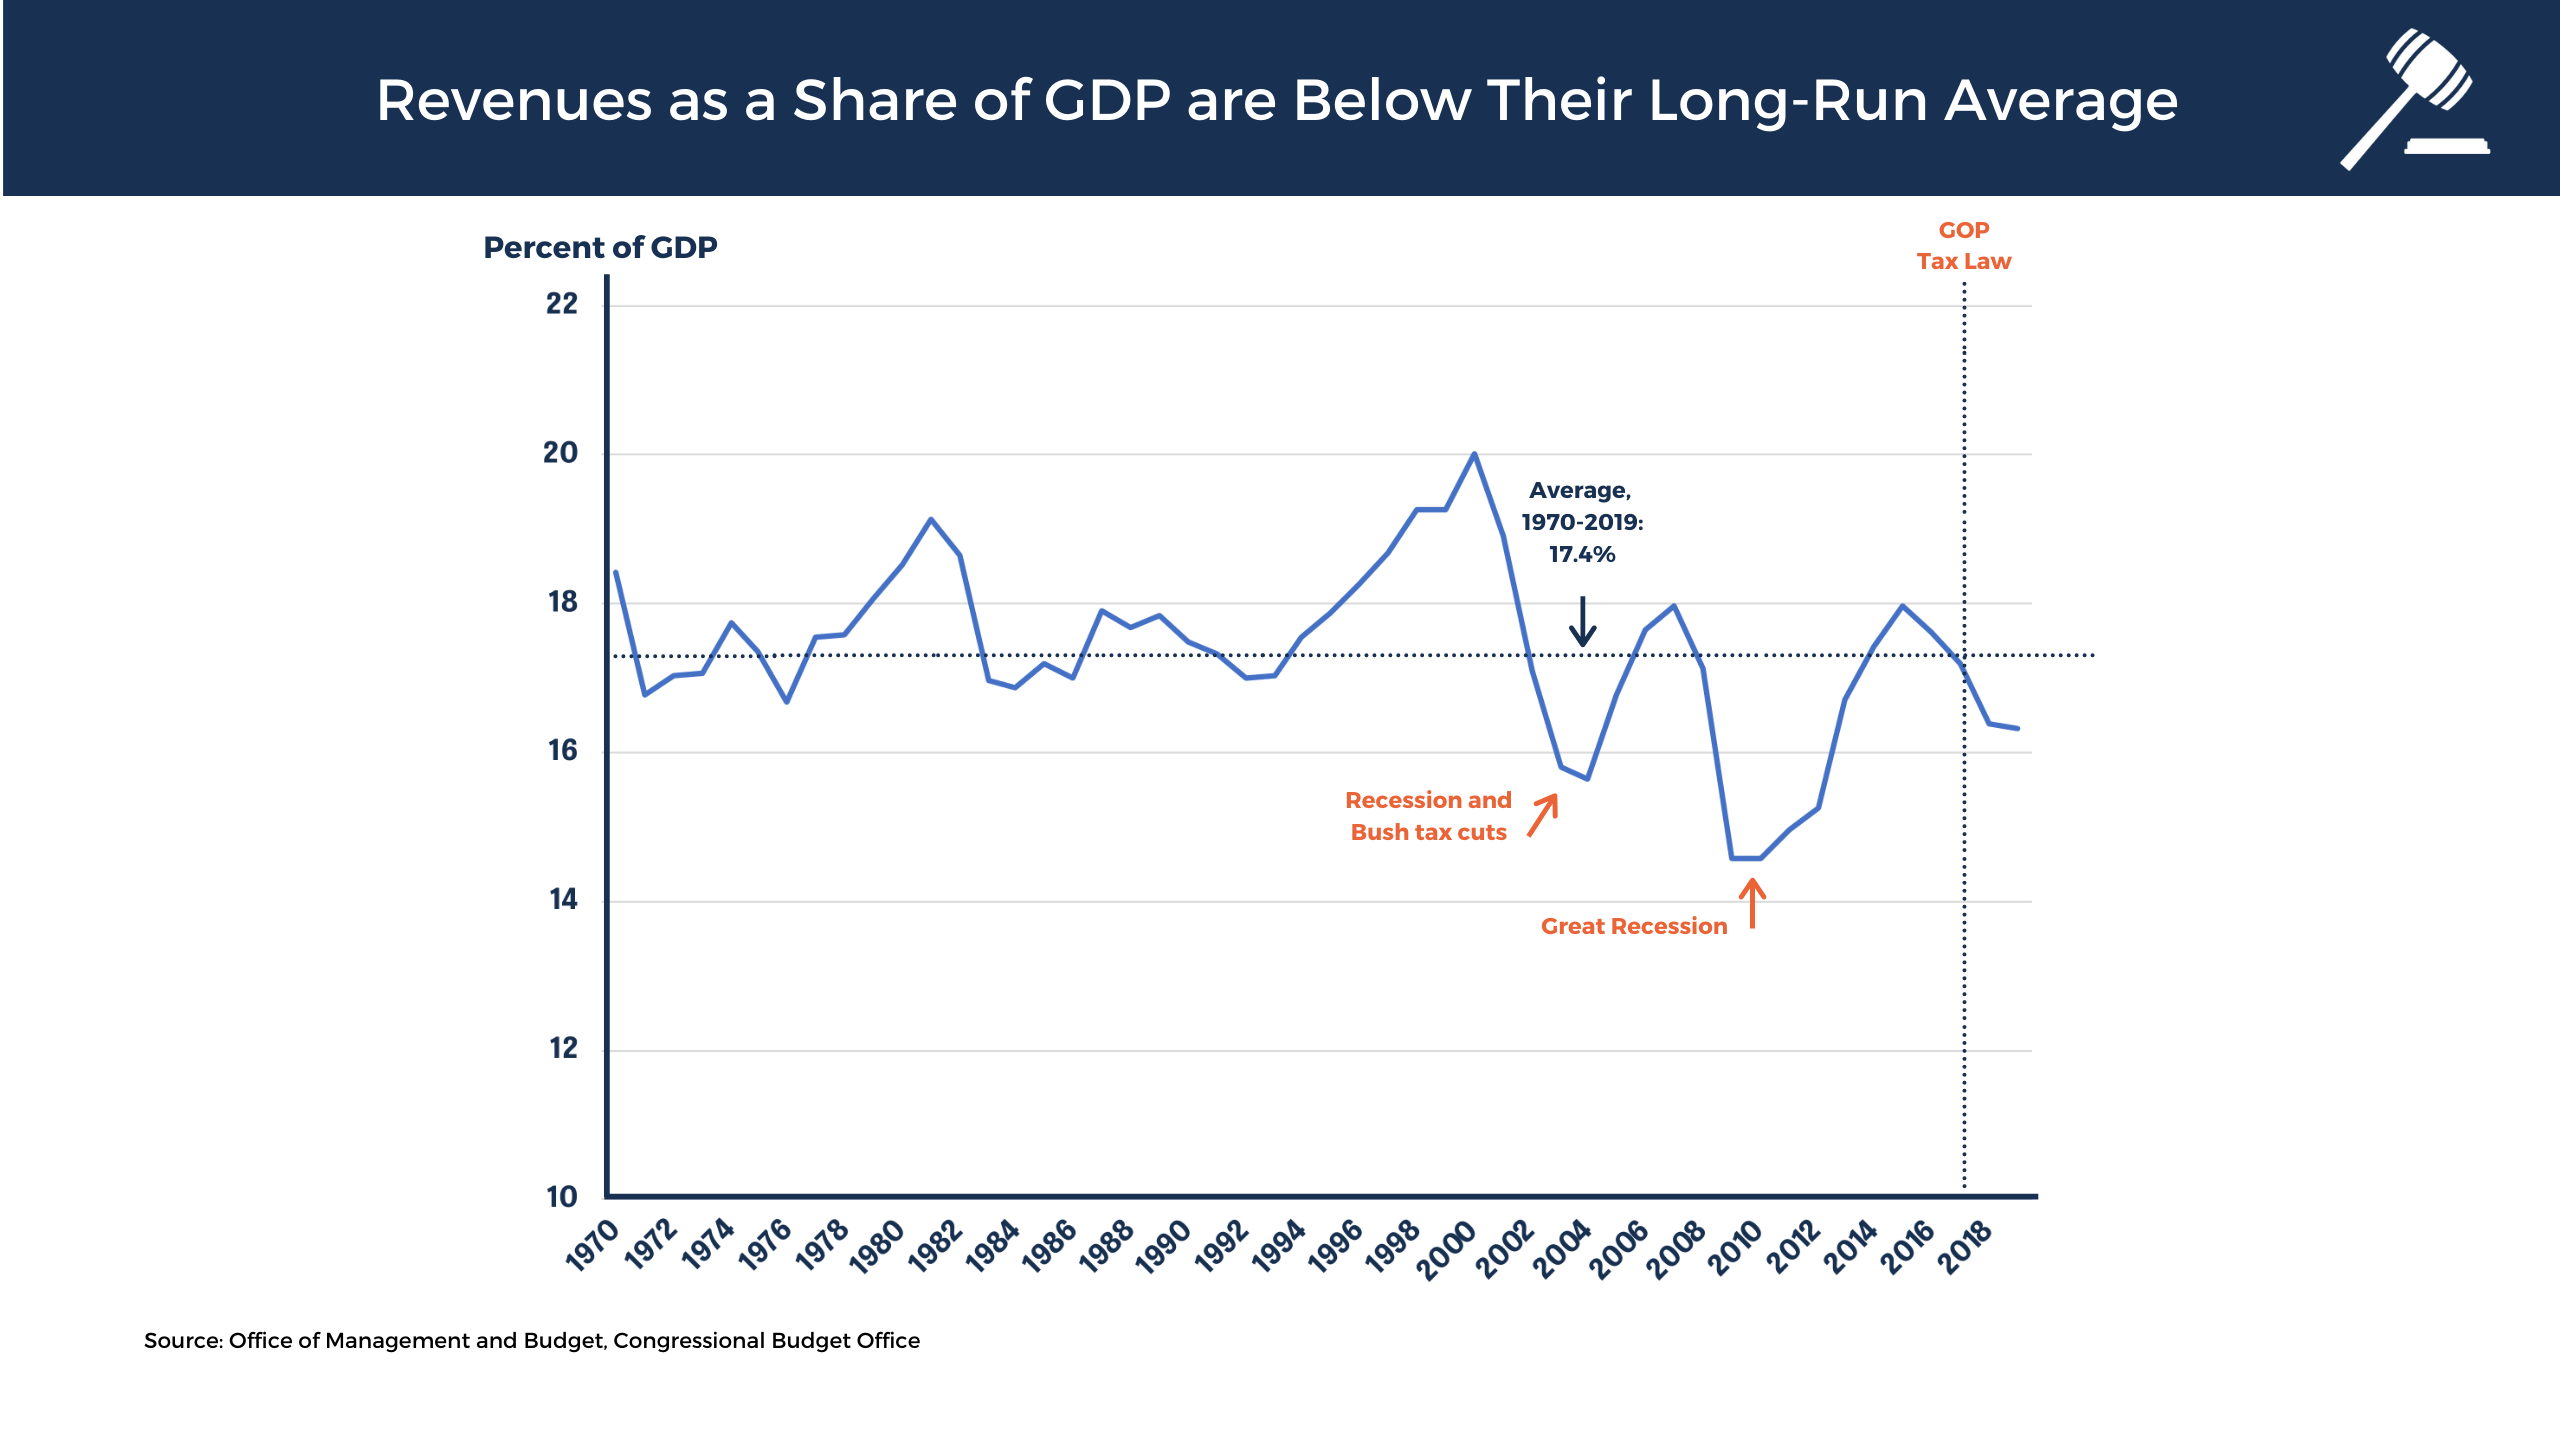 Revenues as a share of GDP are below the long run forecast average